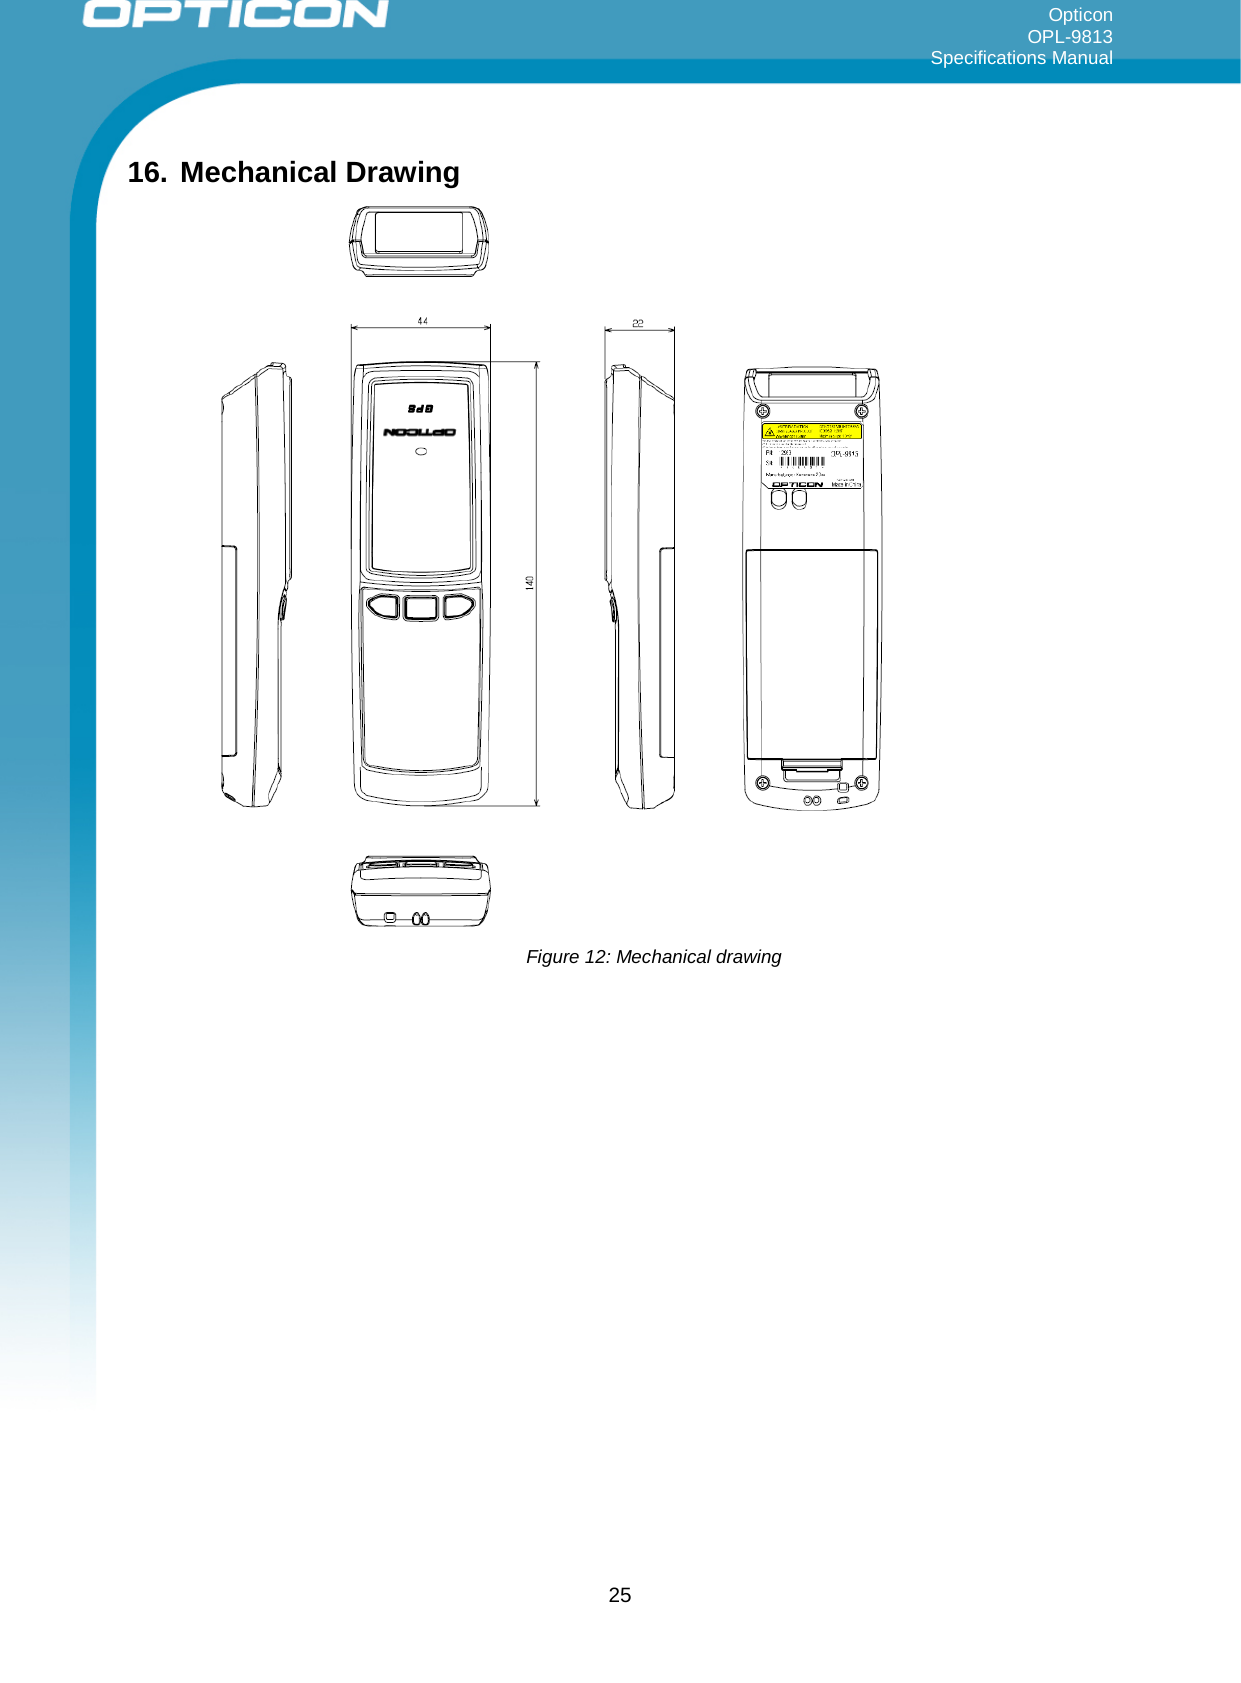 Opticon OPL-9813 Specifications Manual     16. Mechanical Drawing  Figure 12: Mechanical drawing   25 